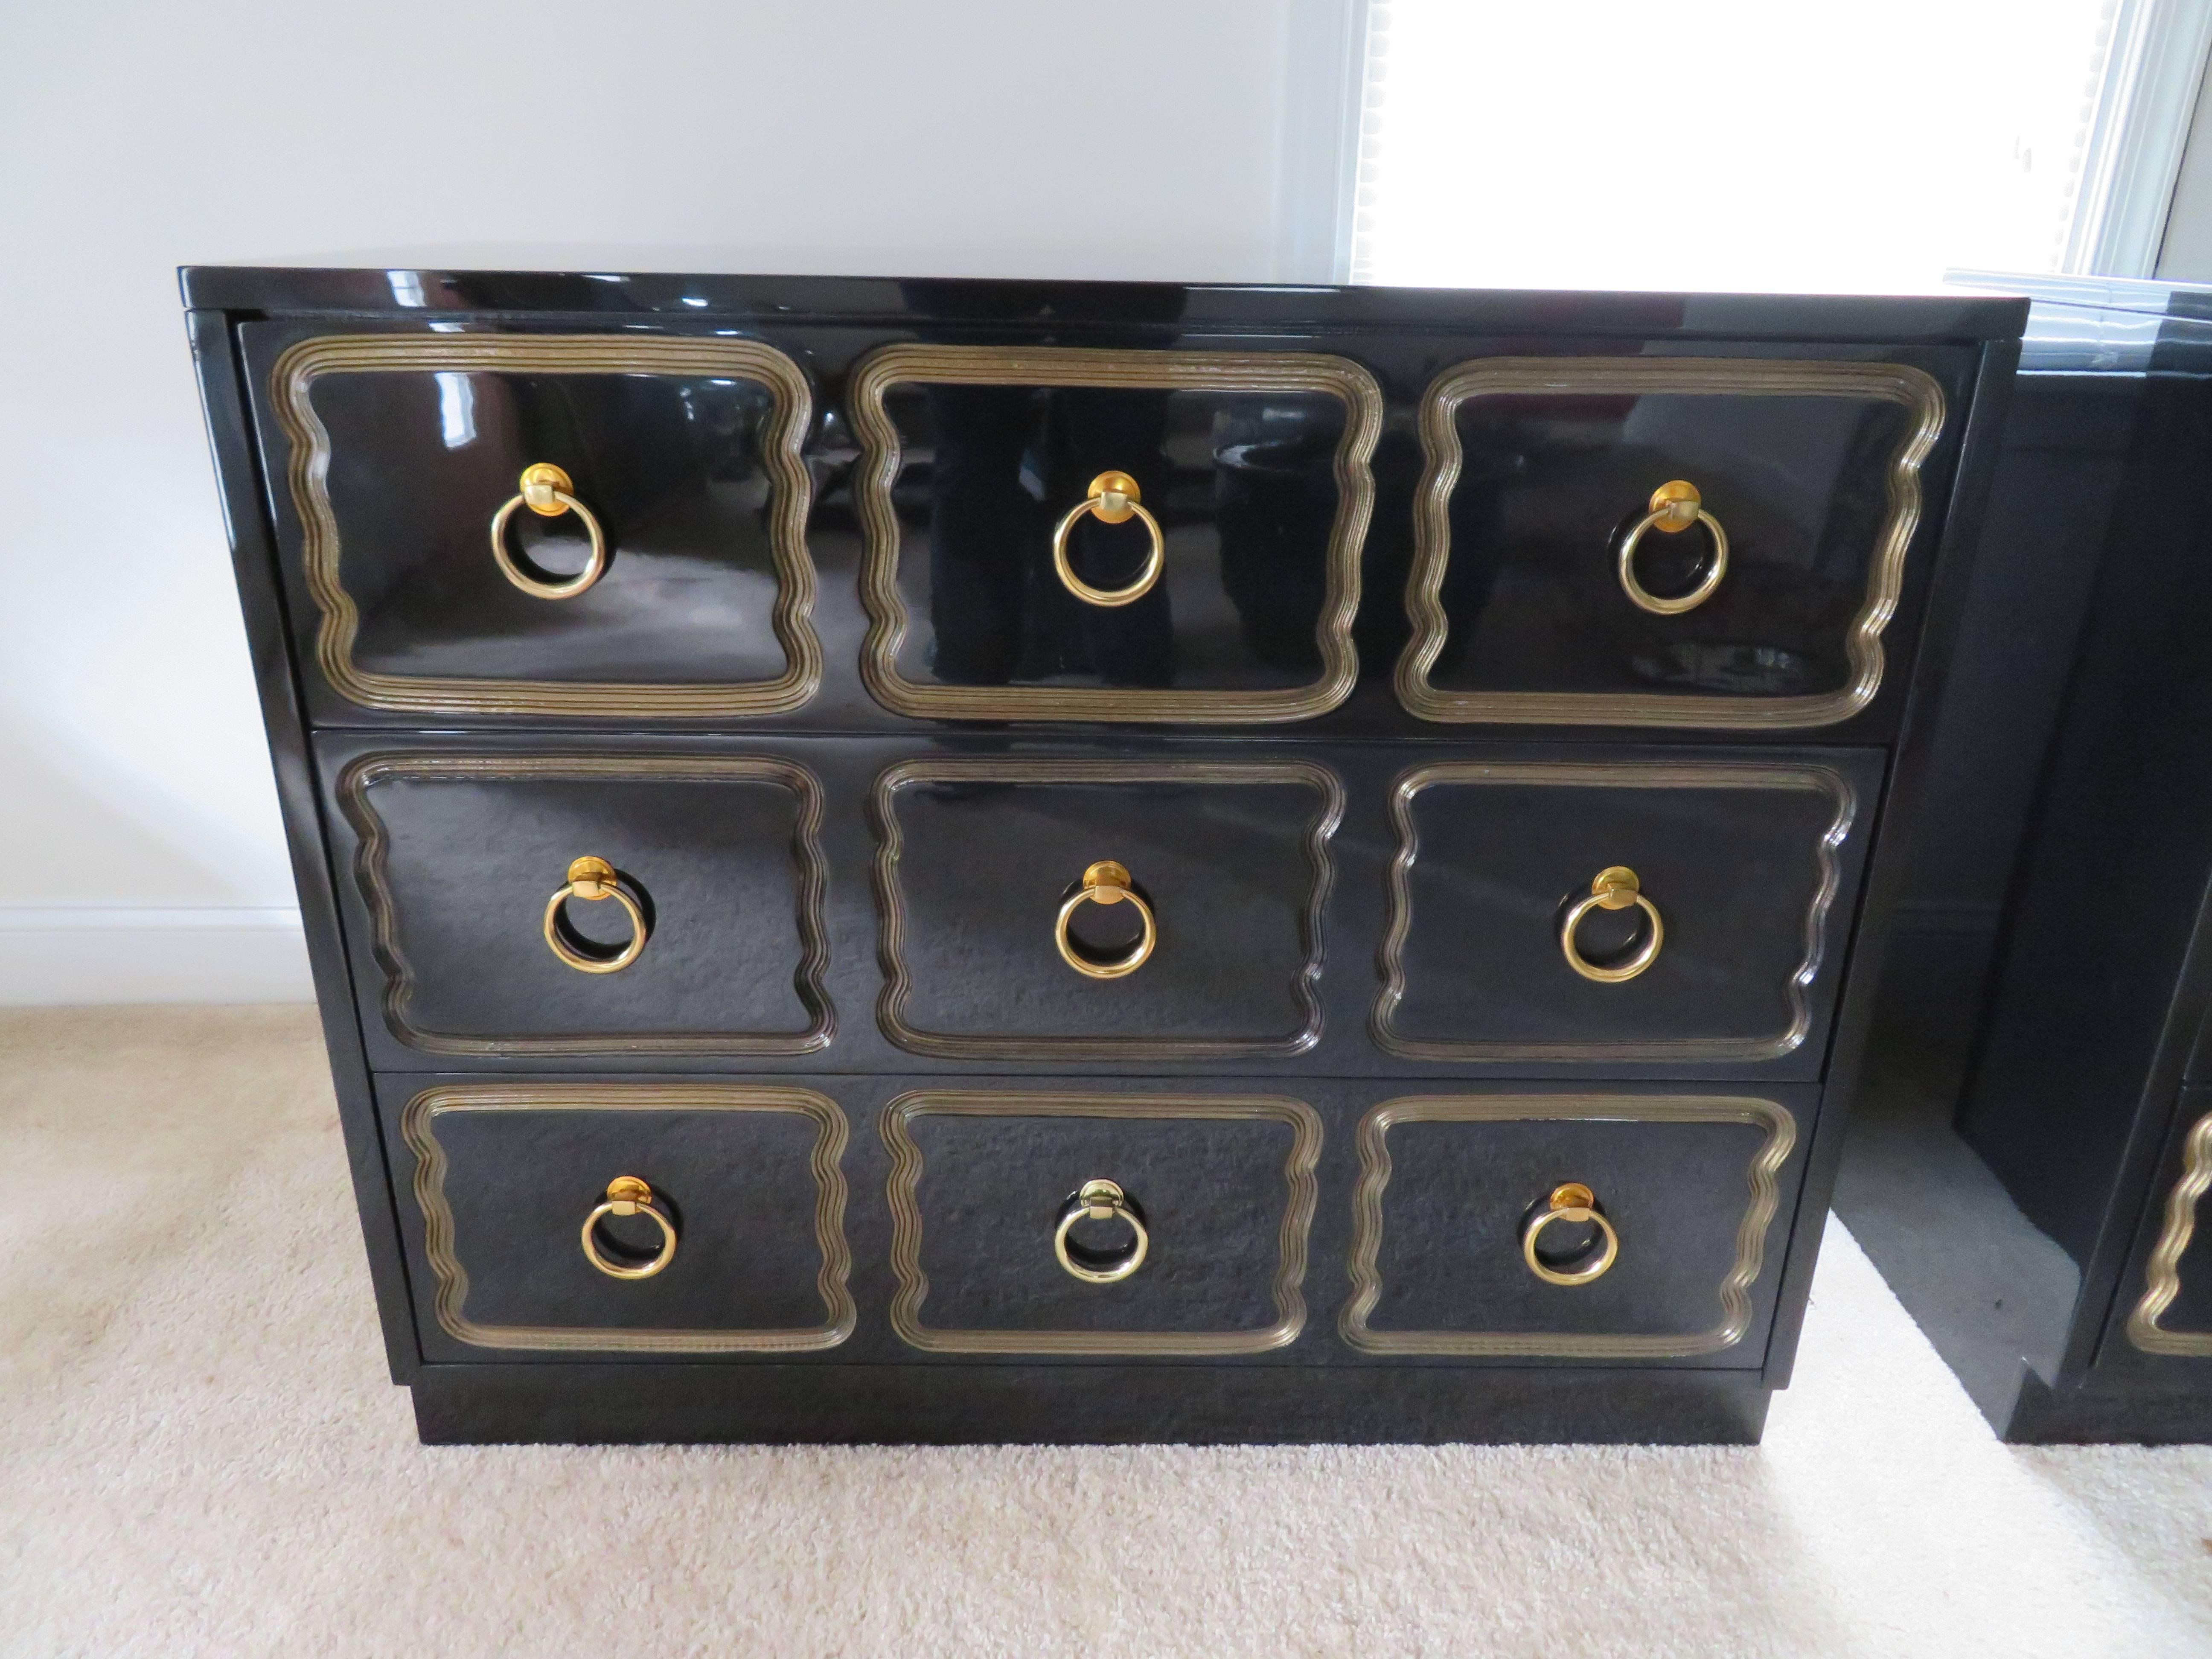 Excellent pair of Dorothy Draper Espana rectangular chests with new glossy black lacquer finish. Large brass ring pulls adorn the centers of the nine wavy gold rimmed drawers. The super high gloss black lacquer finish has been expertly refinished